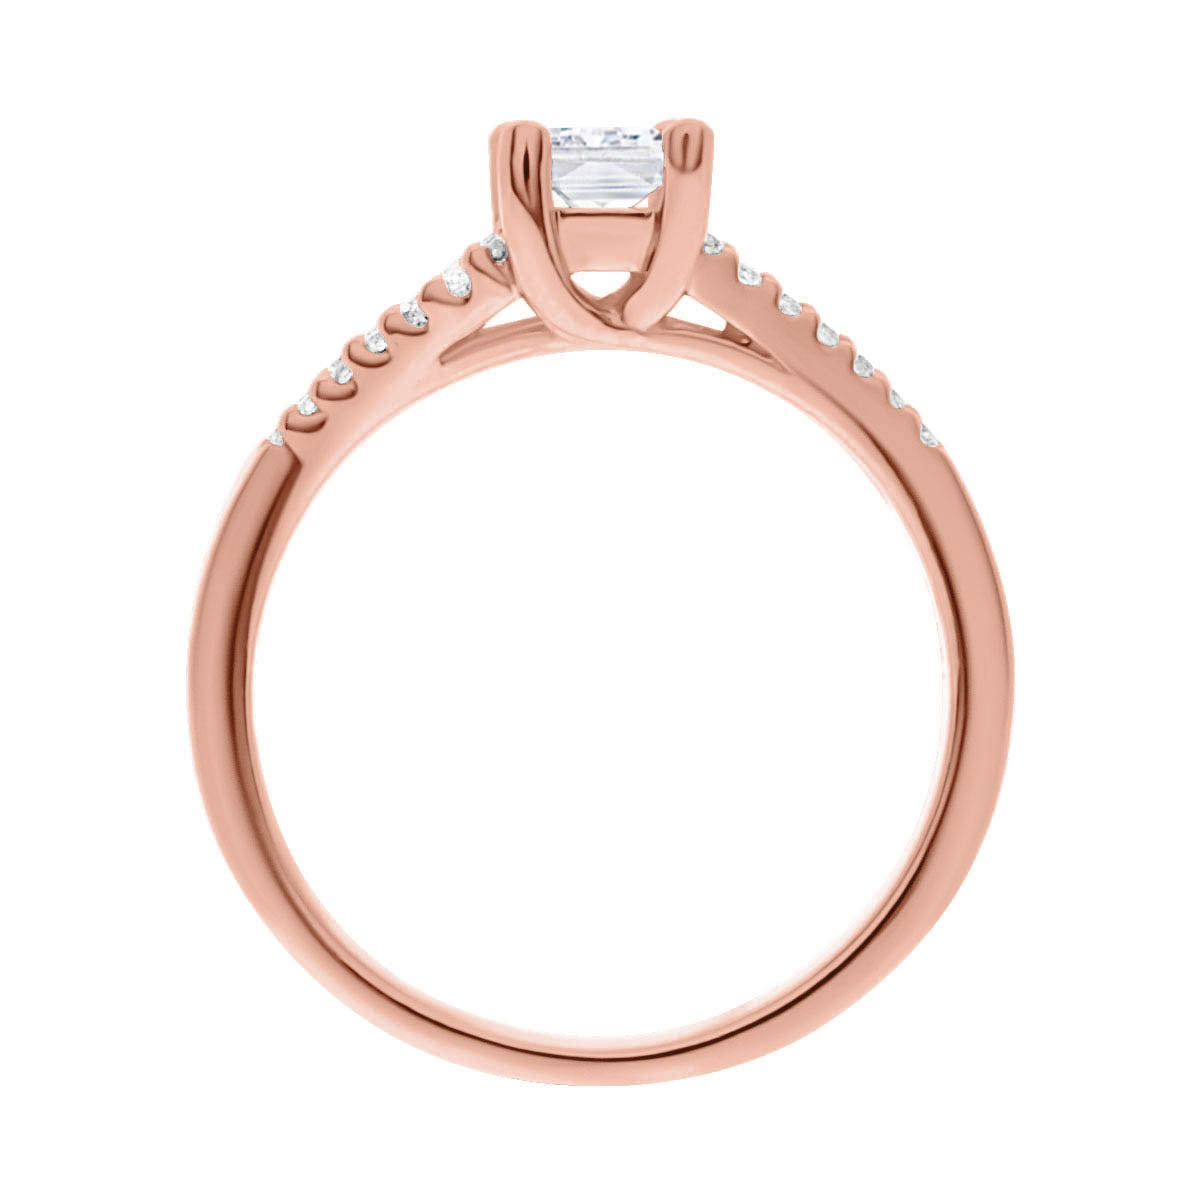 Radiant Cut Diamond Ring in rose gold standing upright